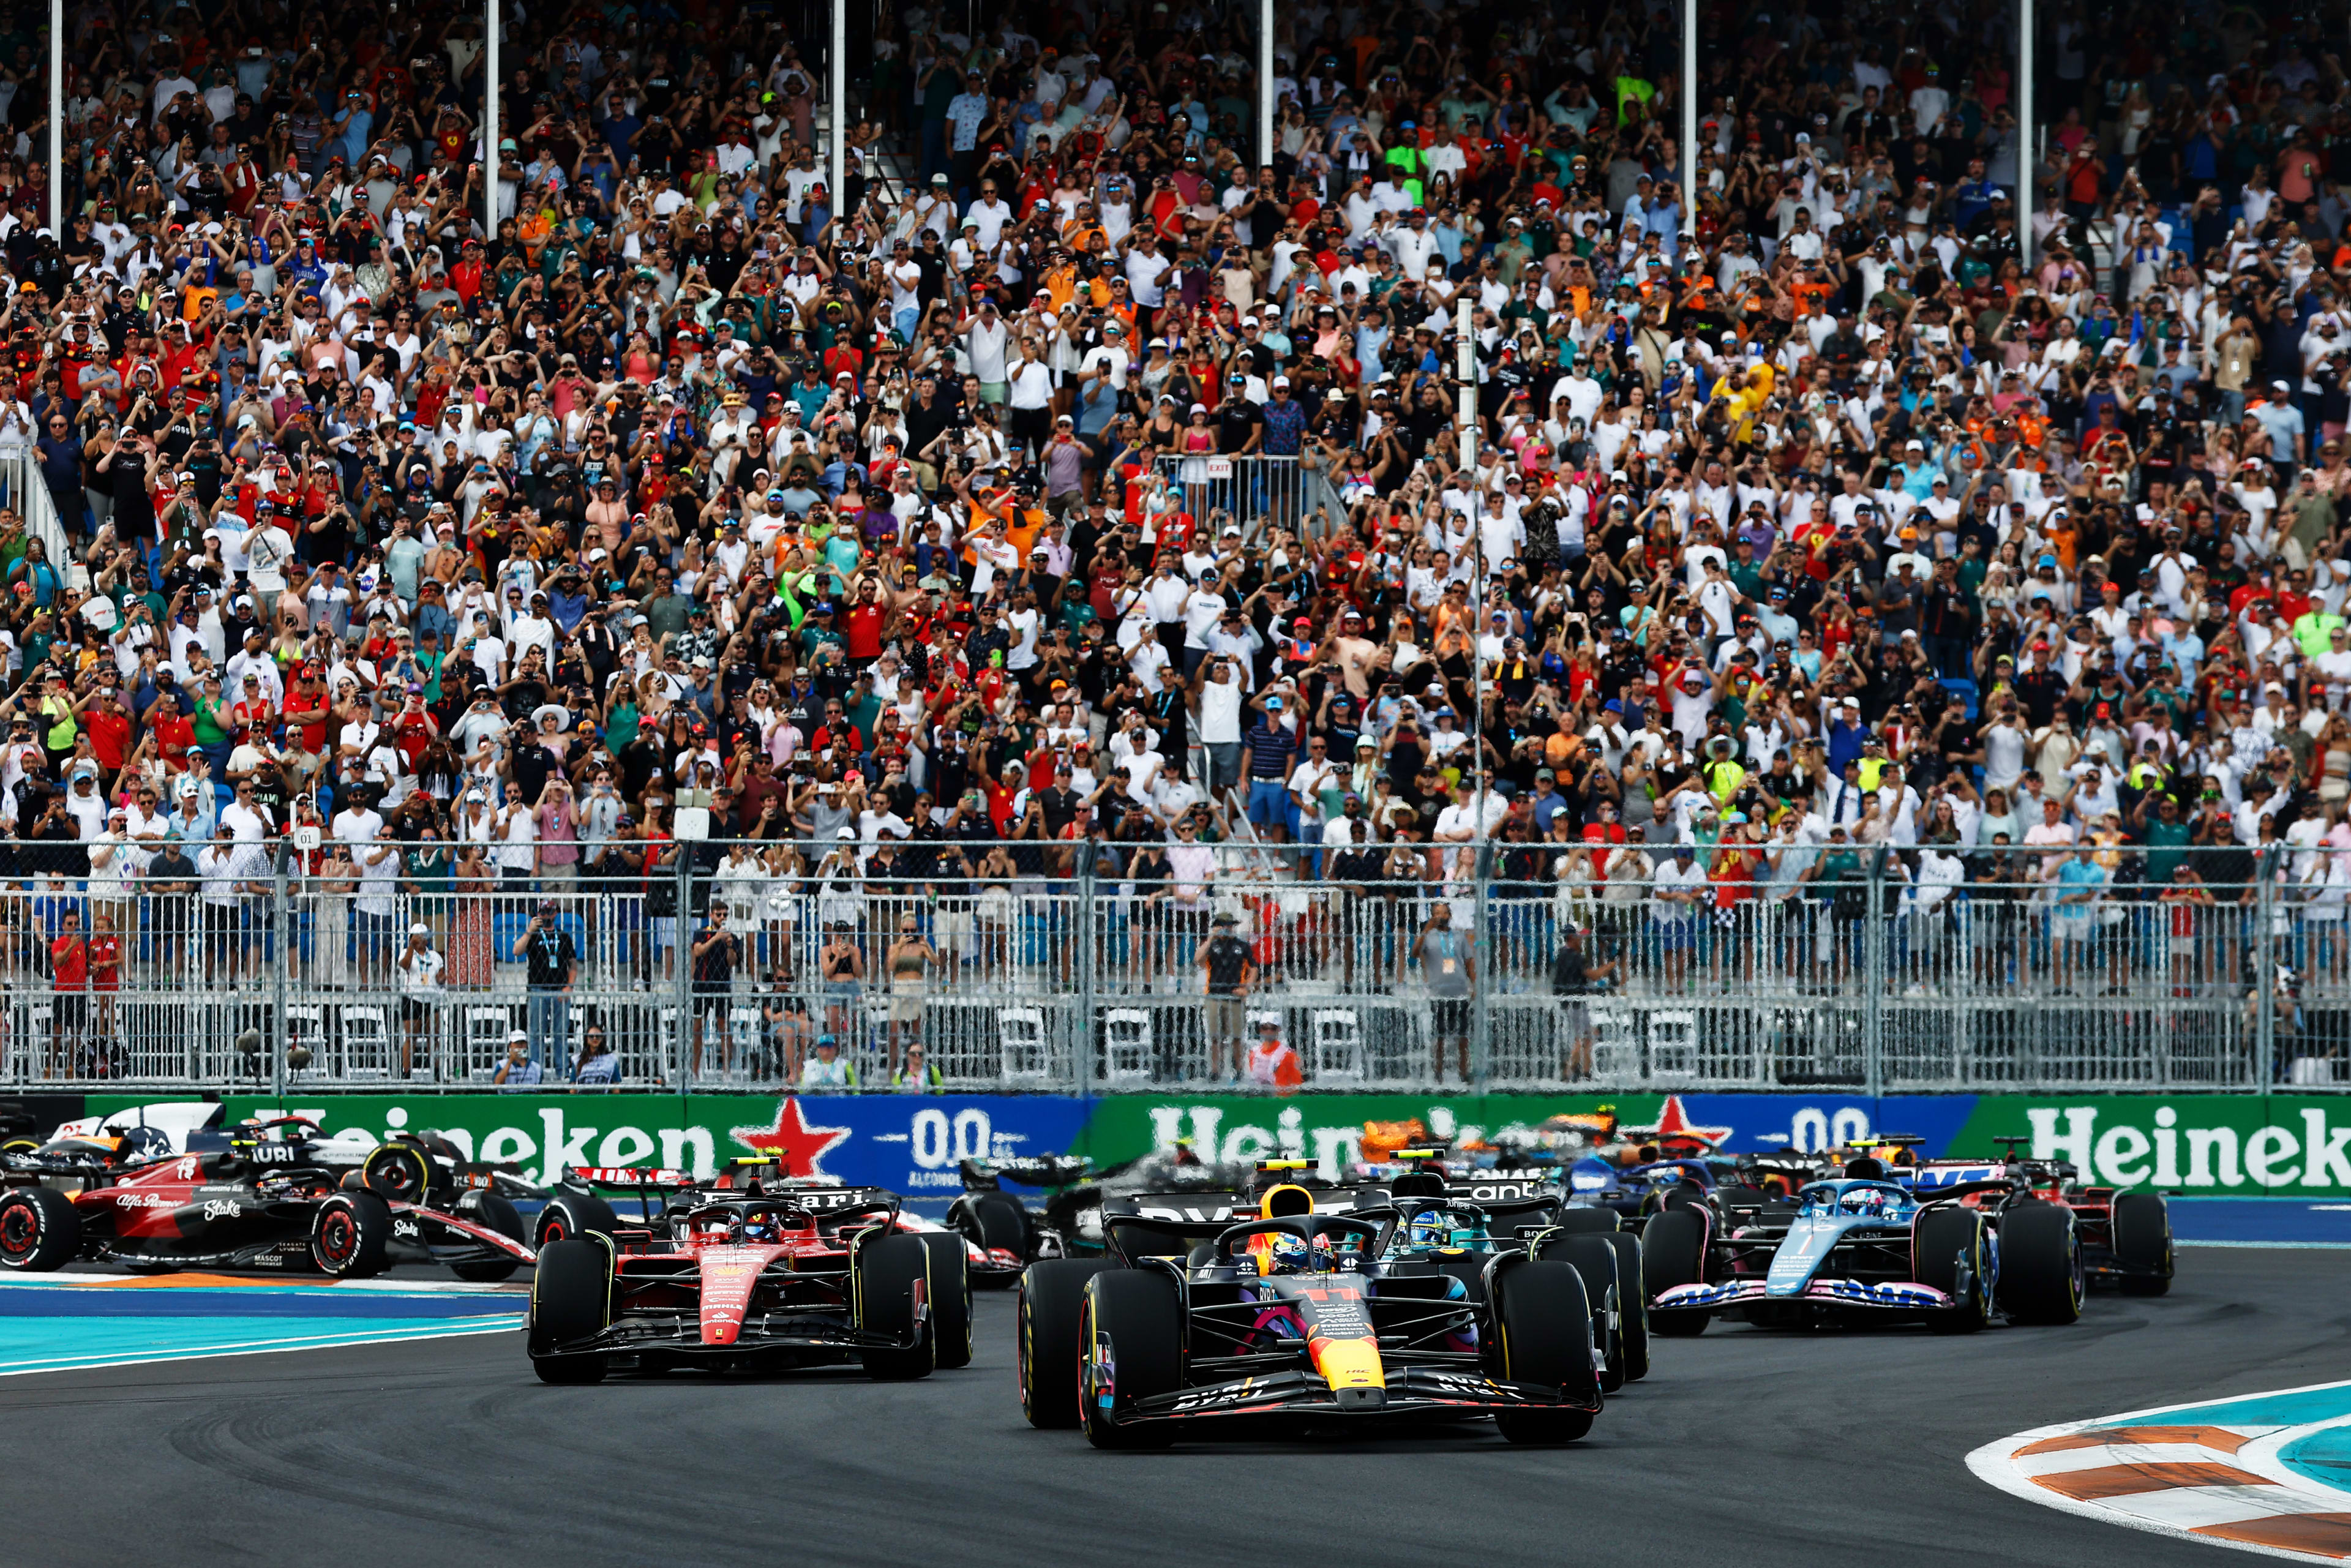 The beginner's guide to the F1 weekend